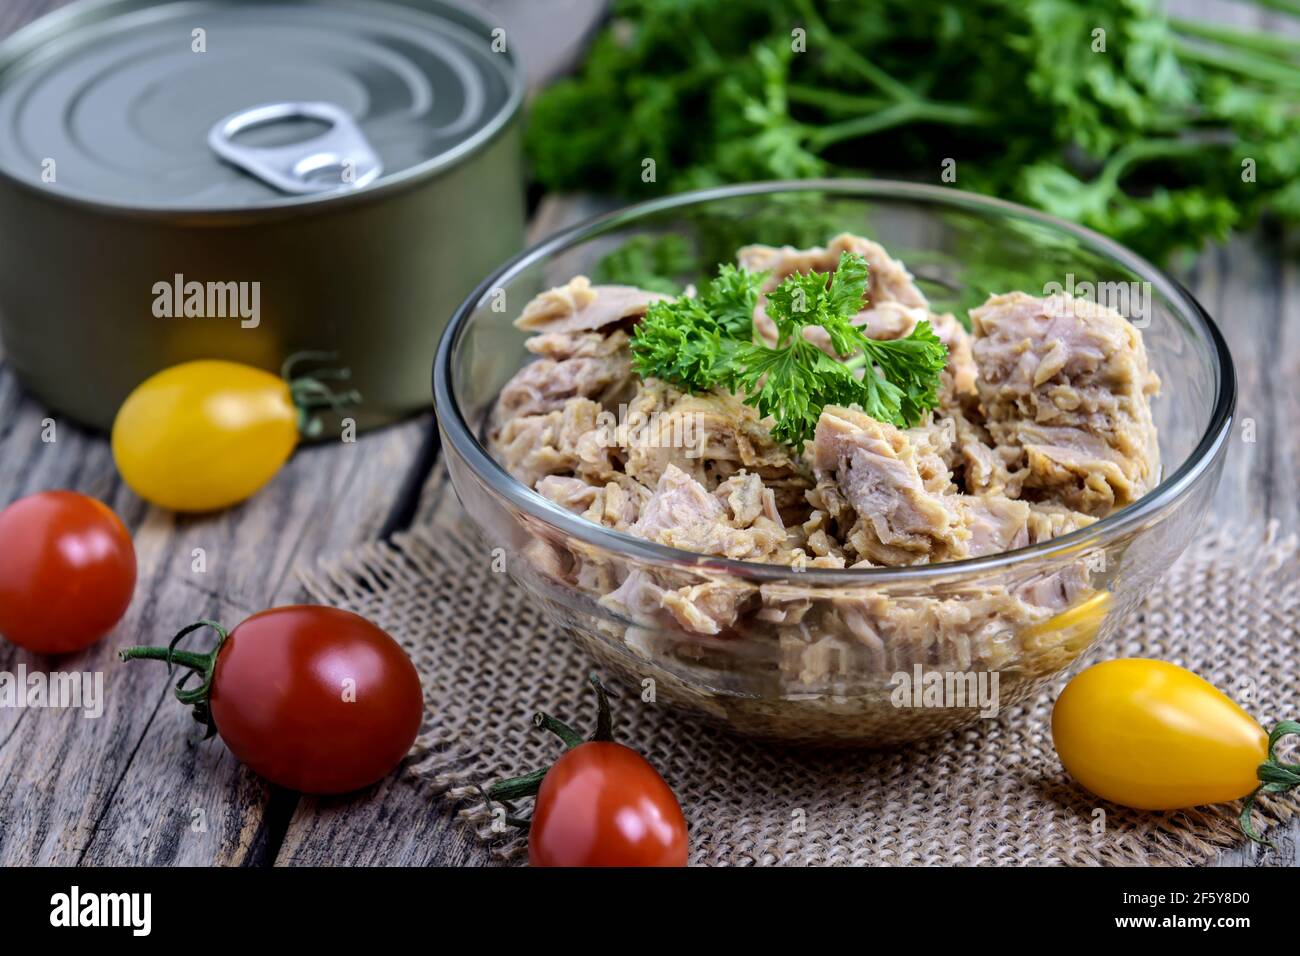 Portion of tuna salad with fresh parsley and cherry tomato on rustic wooden table. Selective focus. Stock Photo